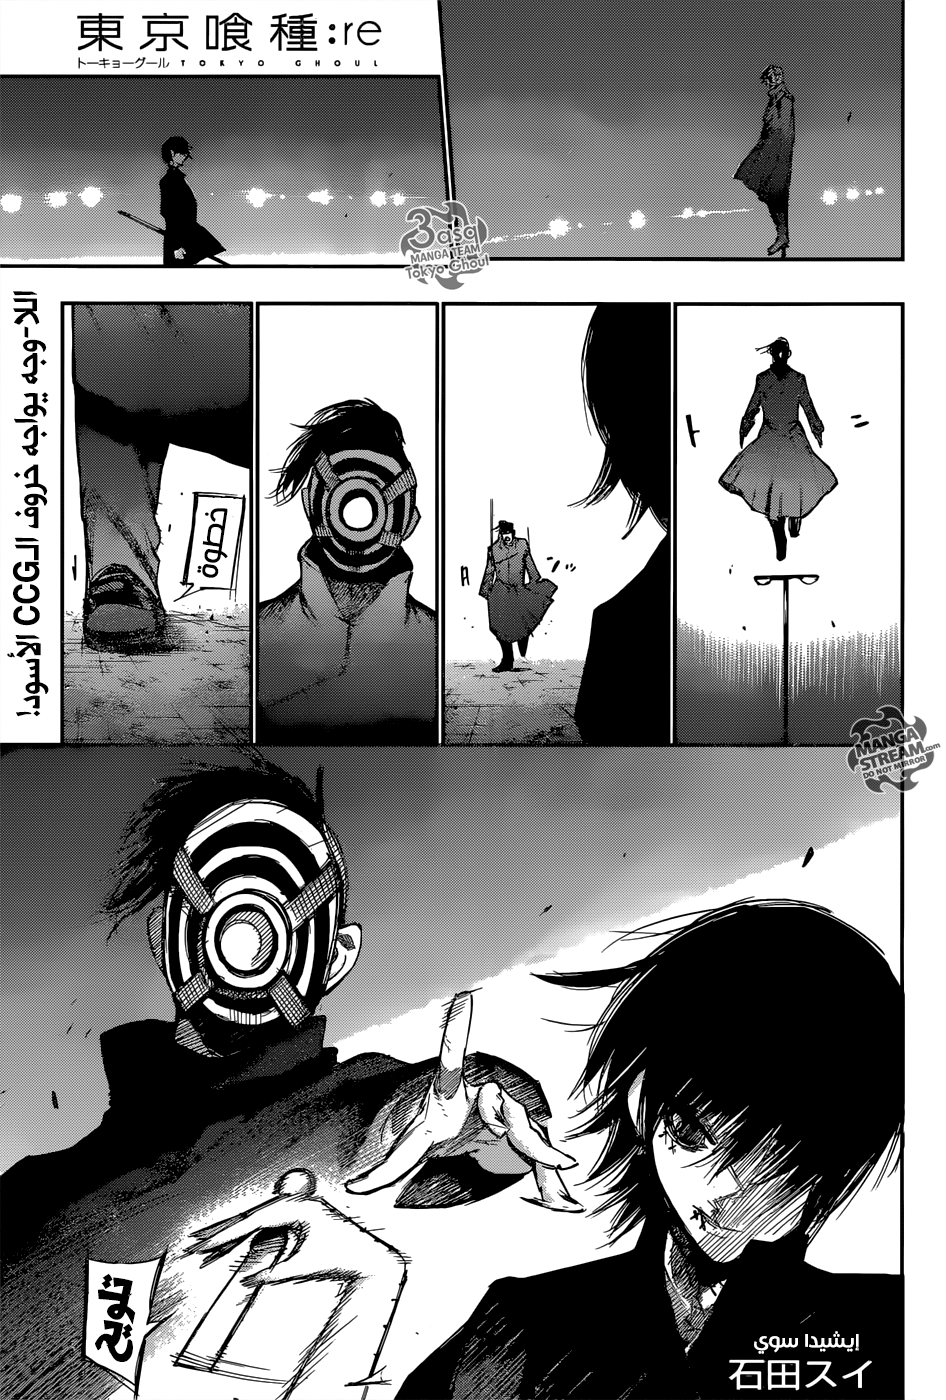 Tokyo Ghoul: Re: Chapter 110 - Page 1